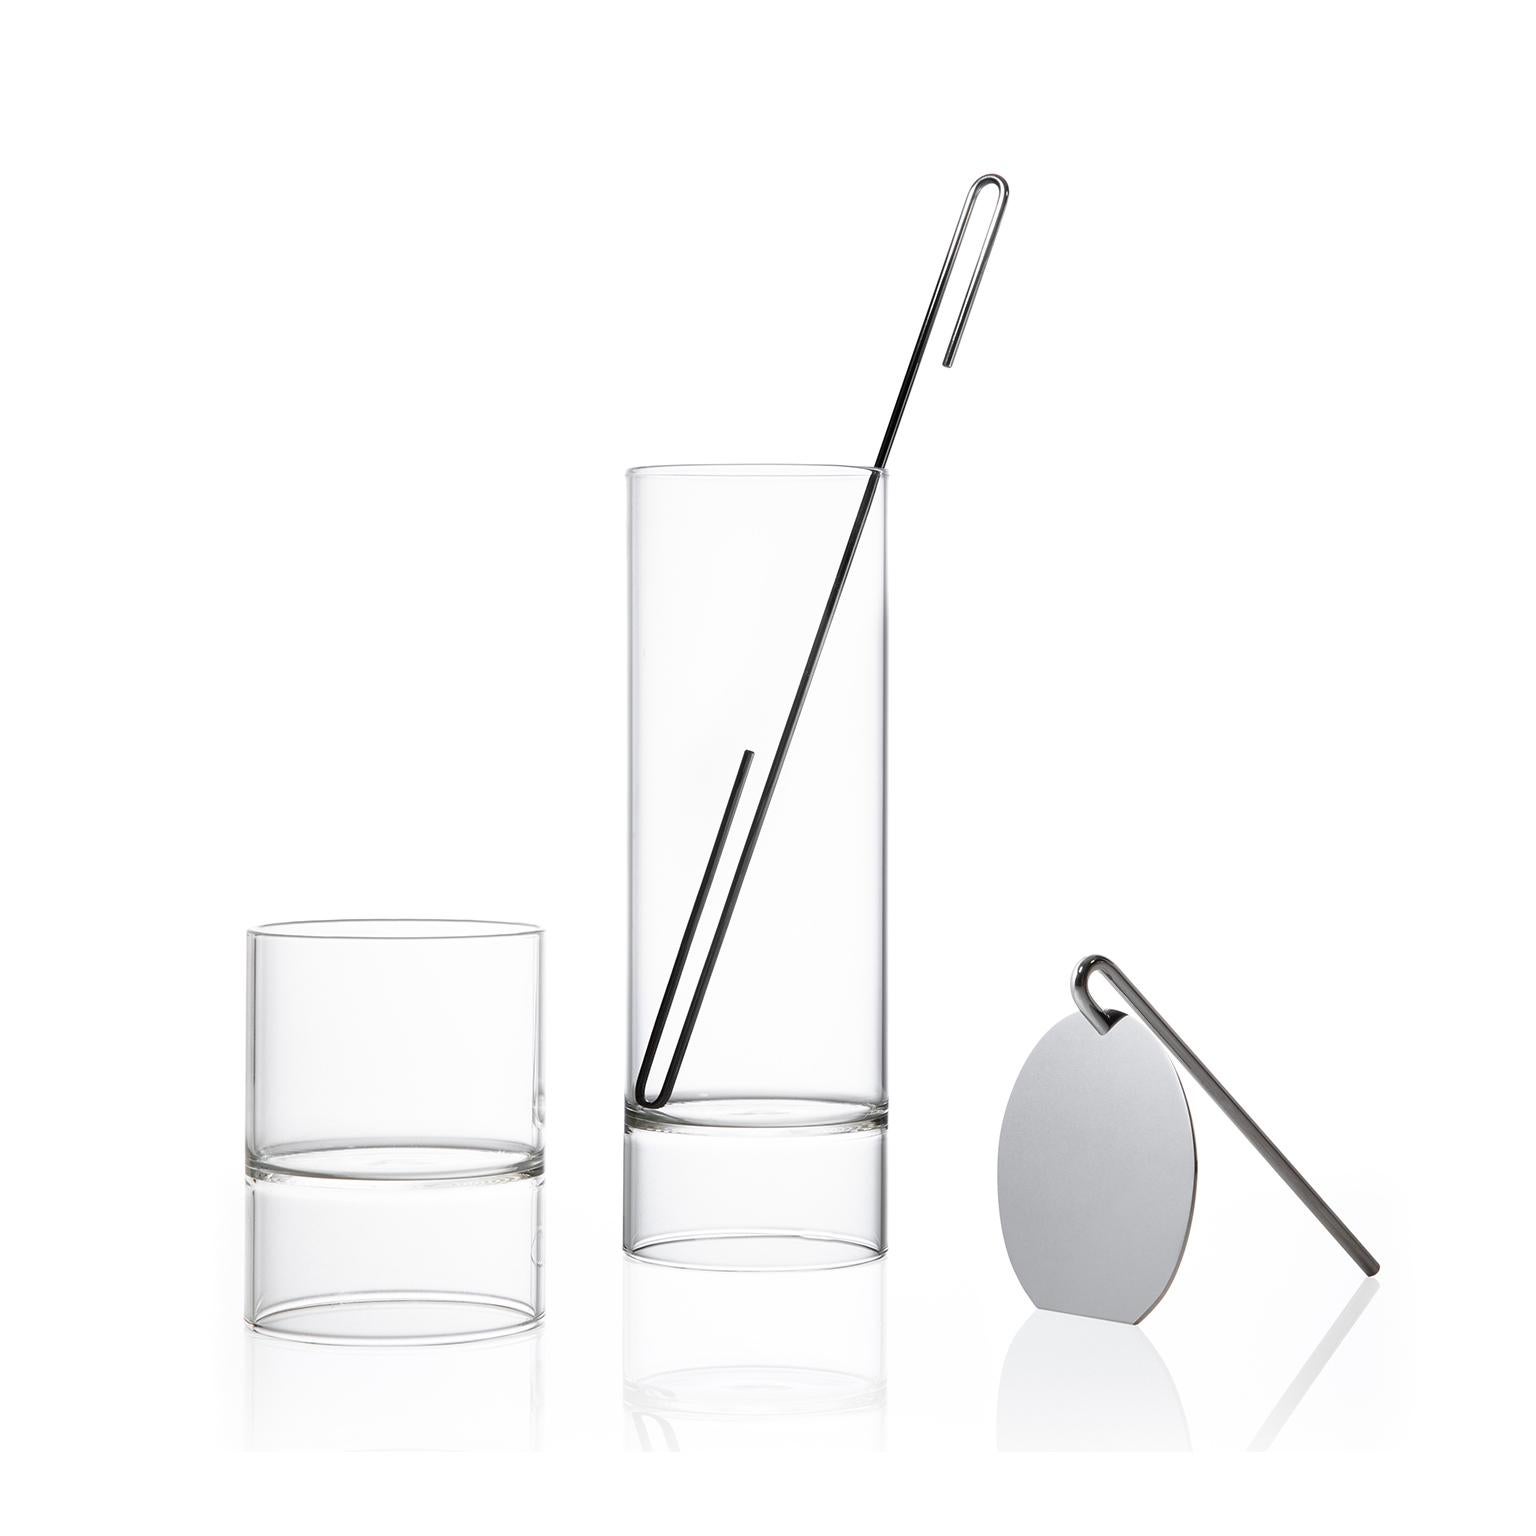 The contemporary Czech glass minimal Revolution collection set includes a cocktail mixer carafe, strainer, stir stick, and four double-ended Rocks Martini glasses. 

This item is also available in the US

Strikingly simple in form, the minimal